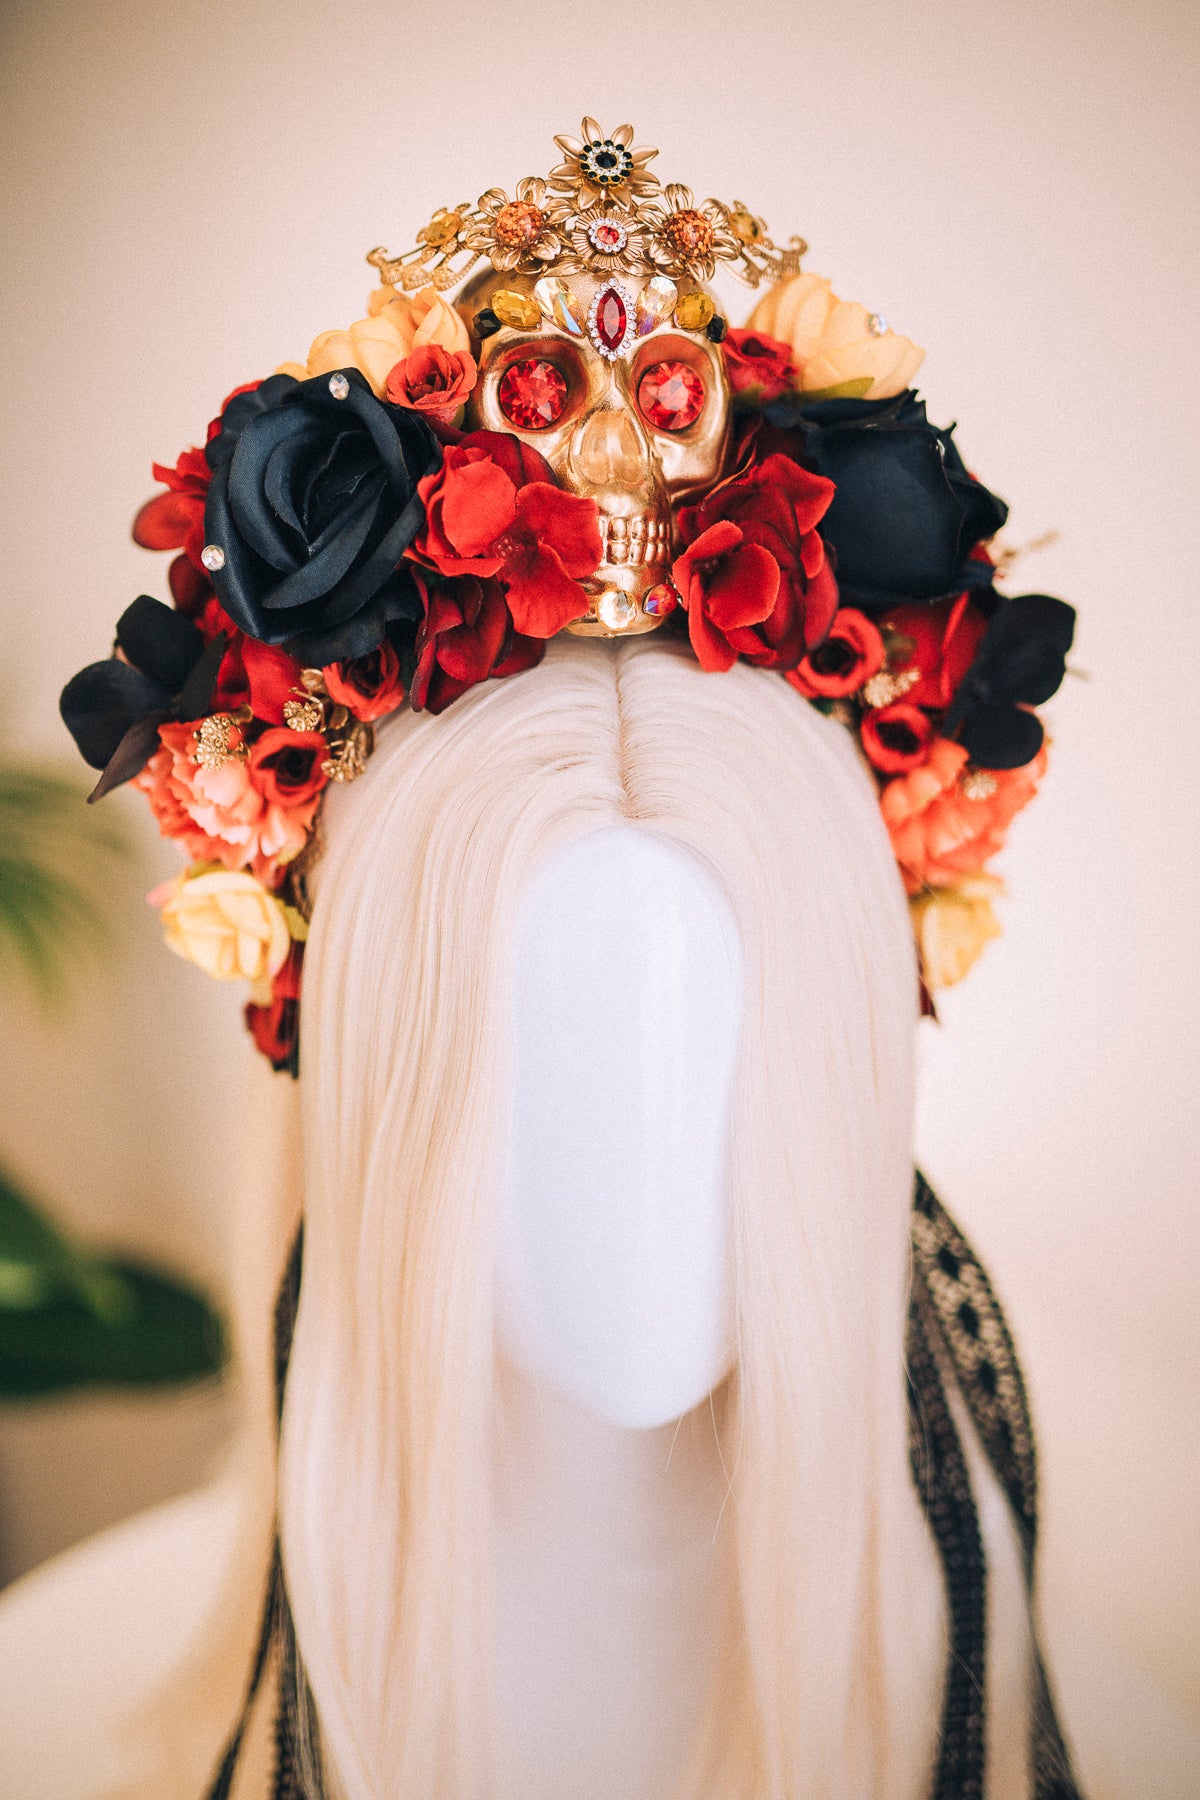 Load image into Gallery viewer, Flower Halo Crown Sugar Skull
